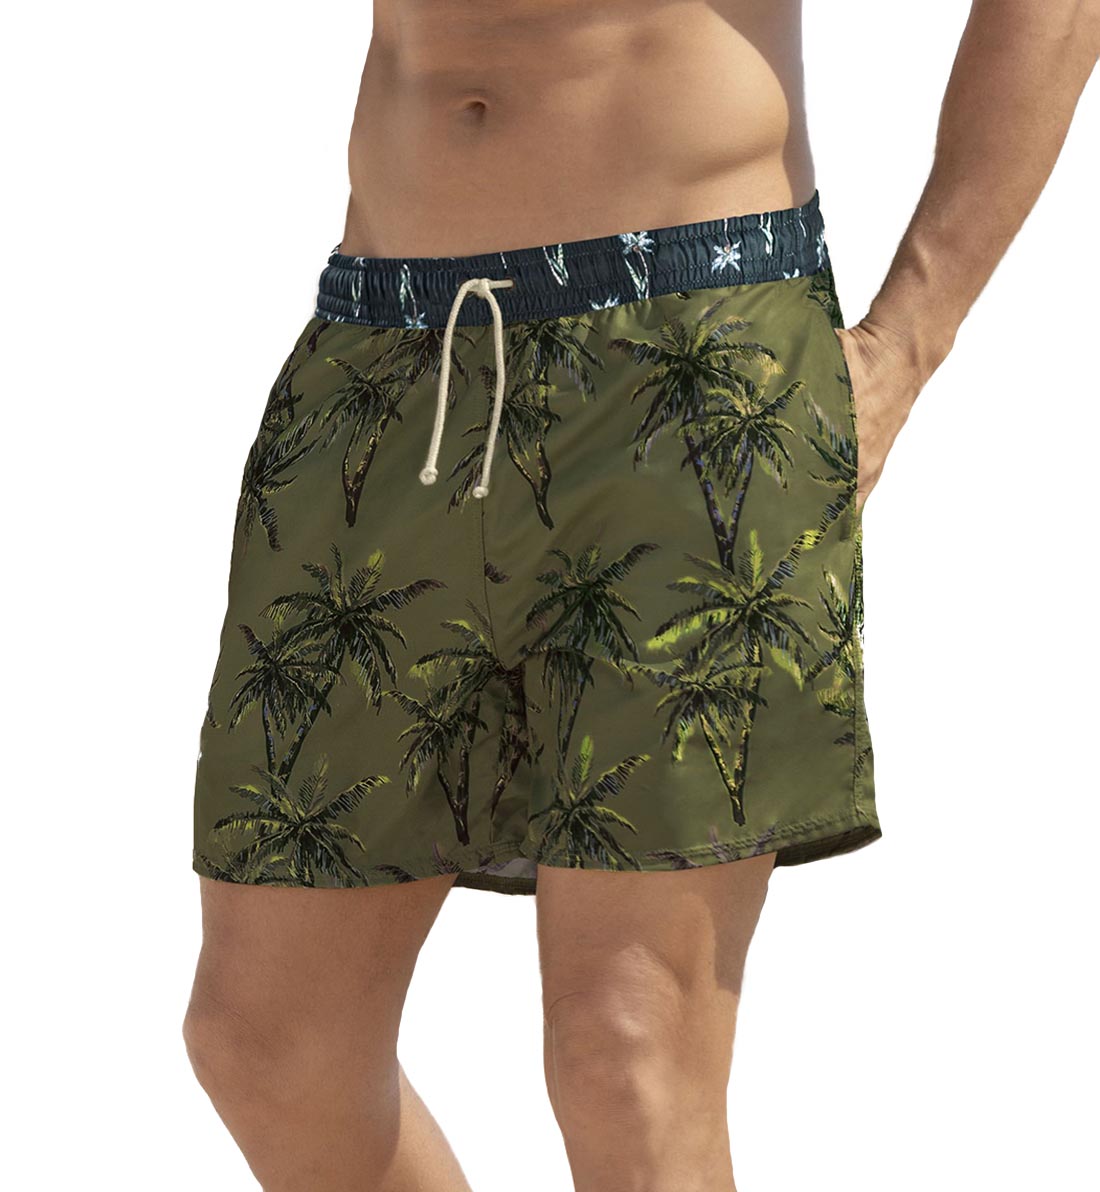 LEO Men&#39;s Printed Loose Fit Swim Trunk (505028),Small,Green Palm - Green Palm,Small